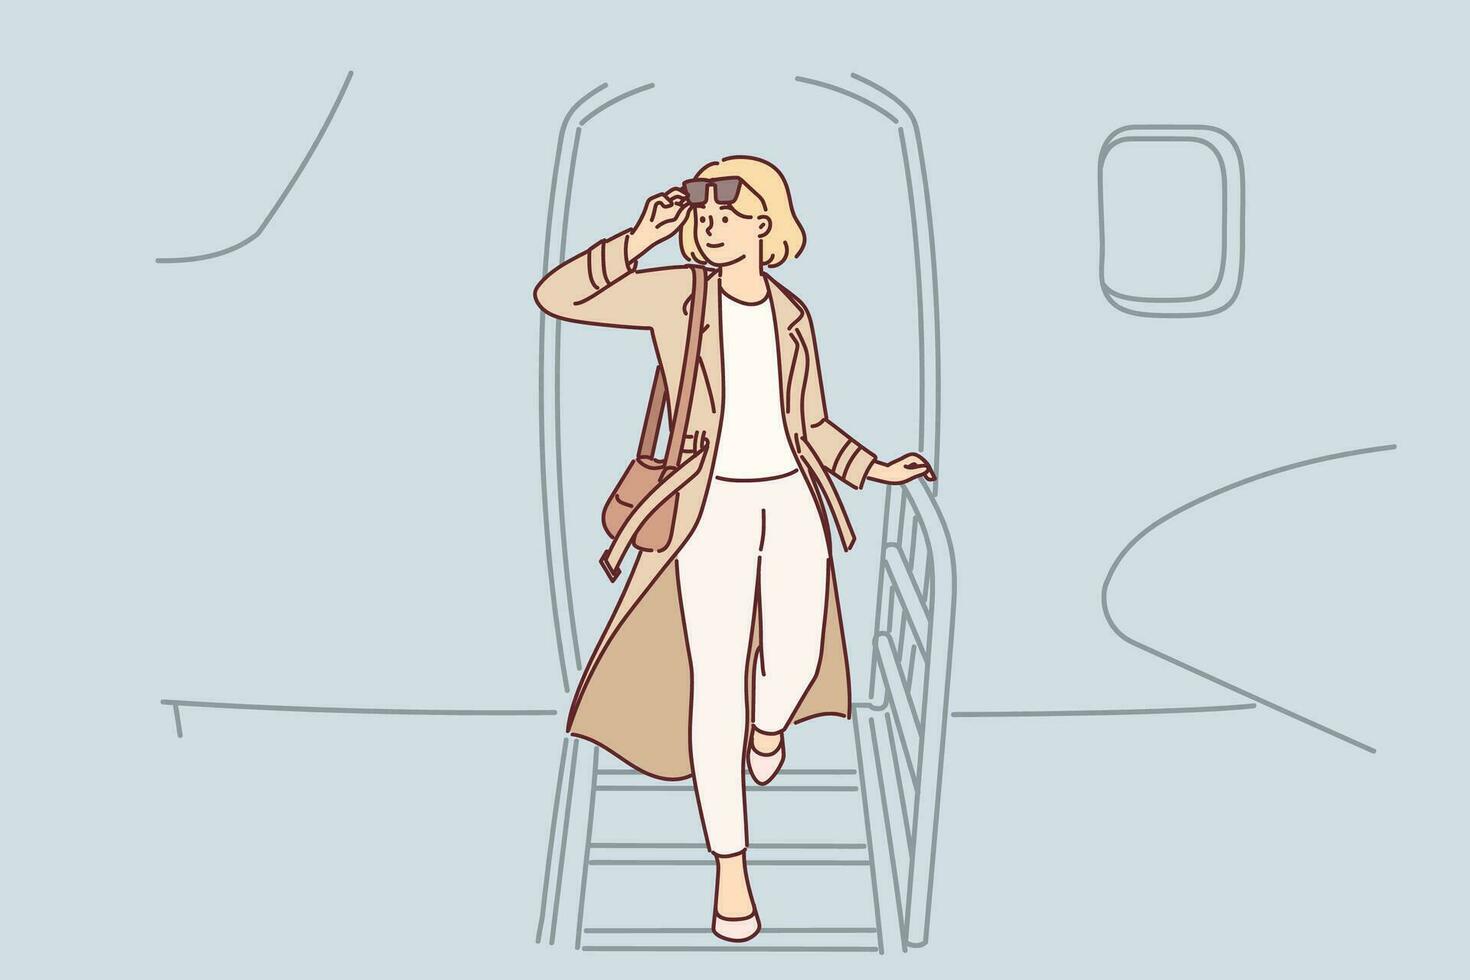 Woman gets off airplane, having arrived on business trip on private flight to conclude important contract. Girl airplane passenger puts on sunglasses after arriving at airport at destination vector